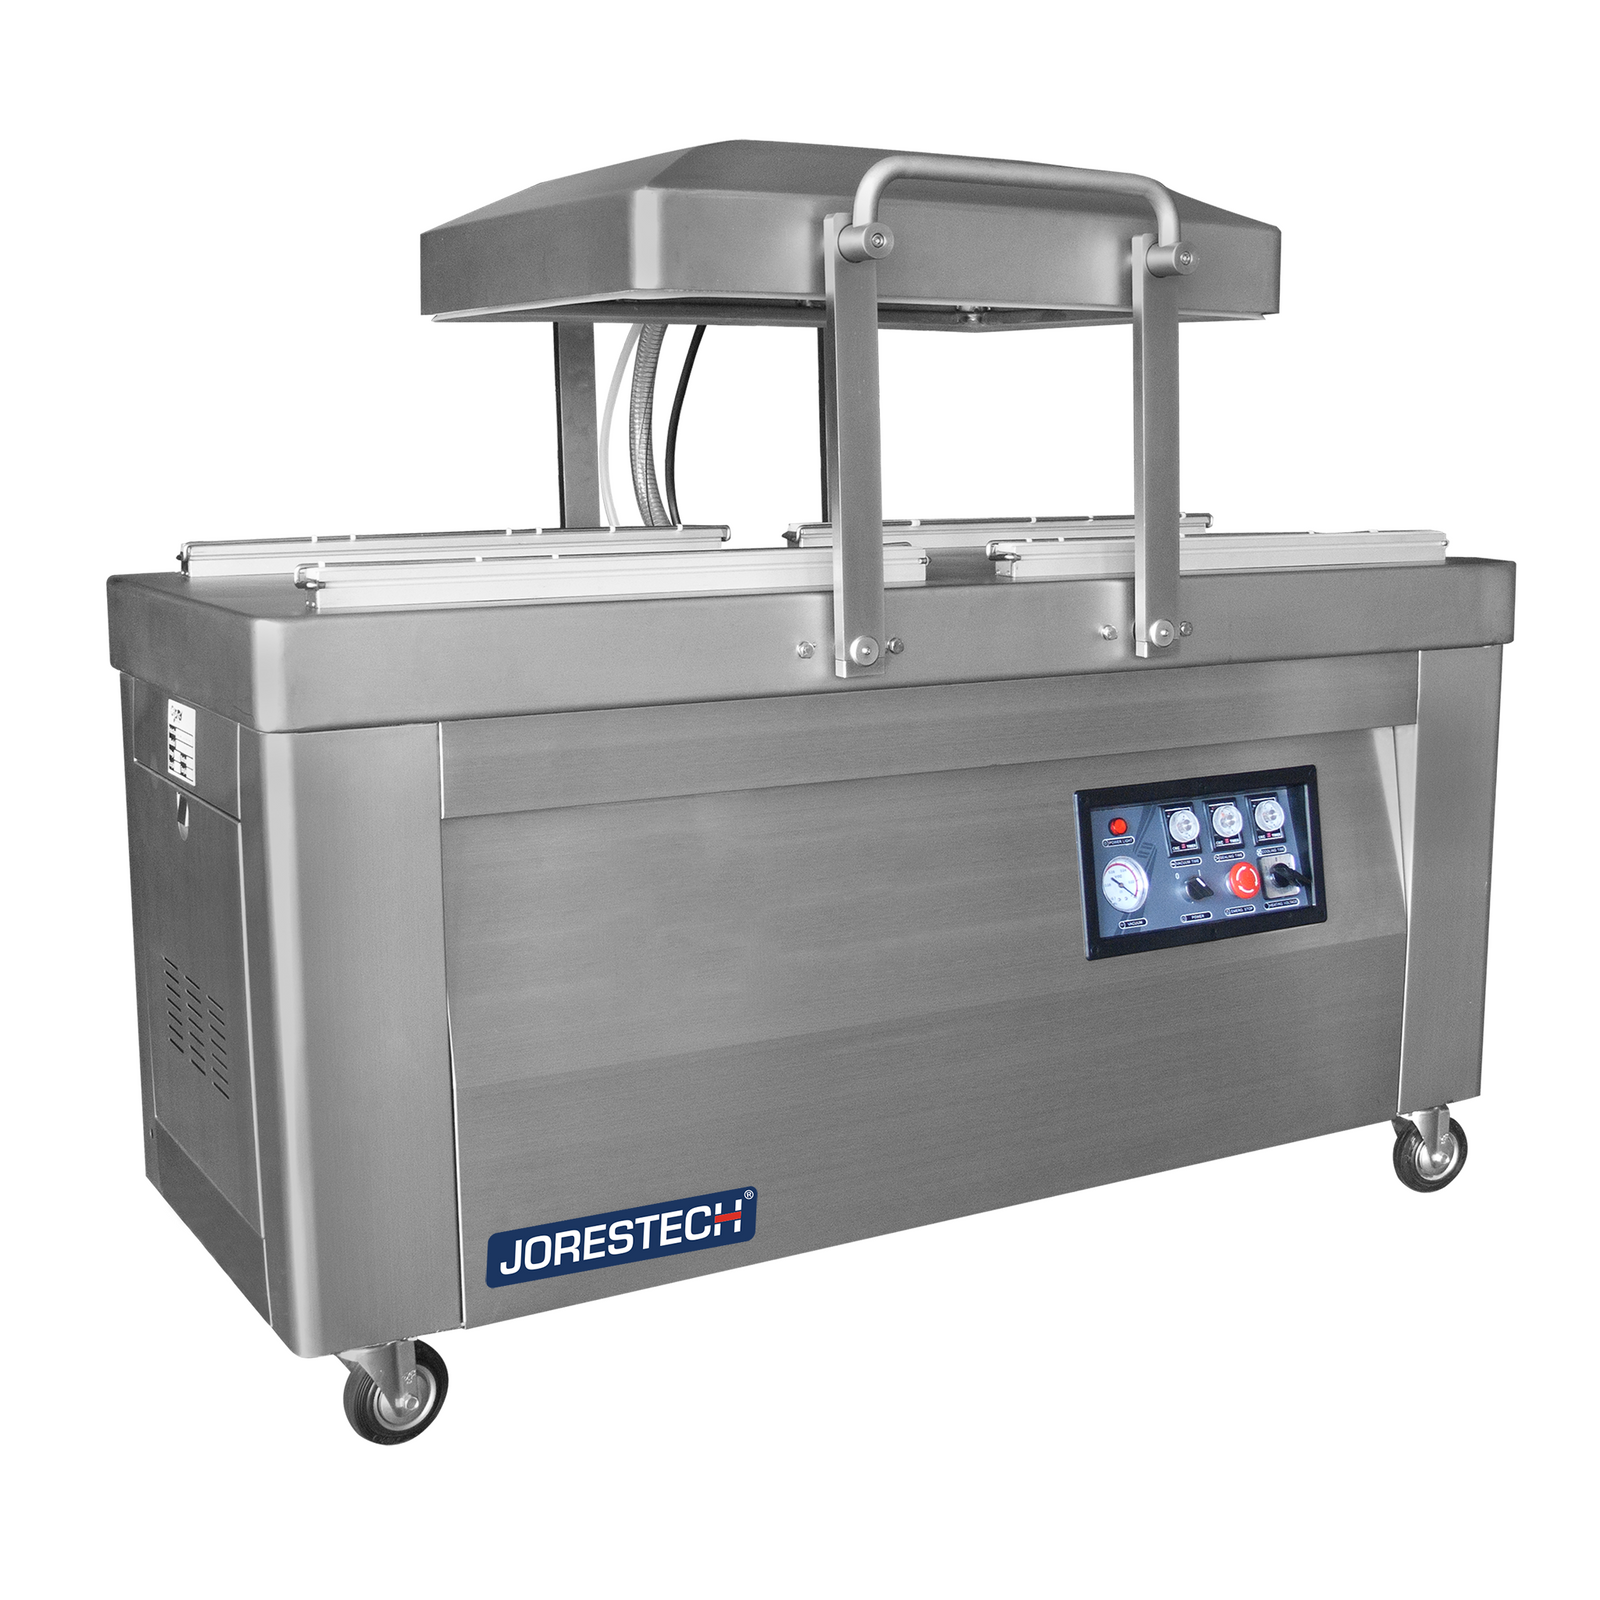 Stainless steel commercial doble chamber vacuum sealer with dual 23 inches seal bar. The machine has the lid open